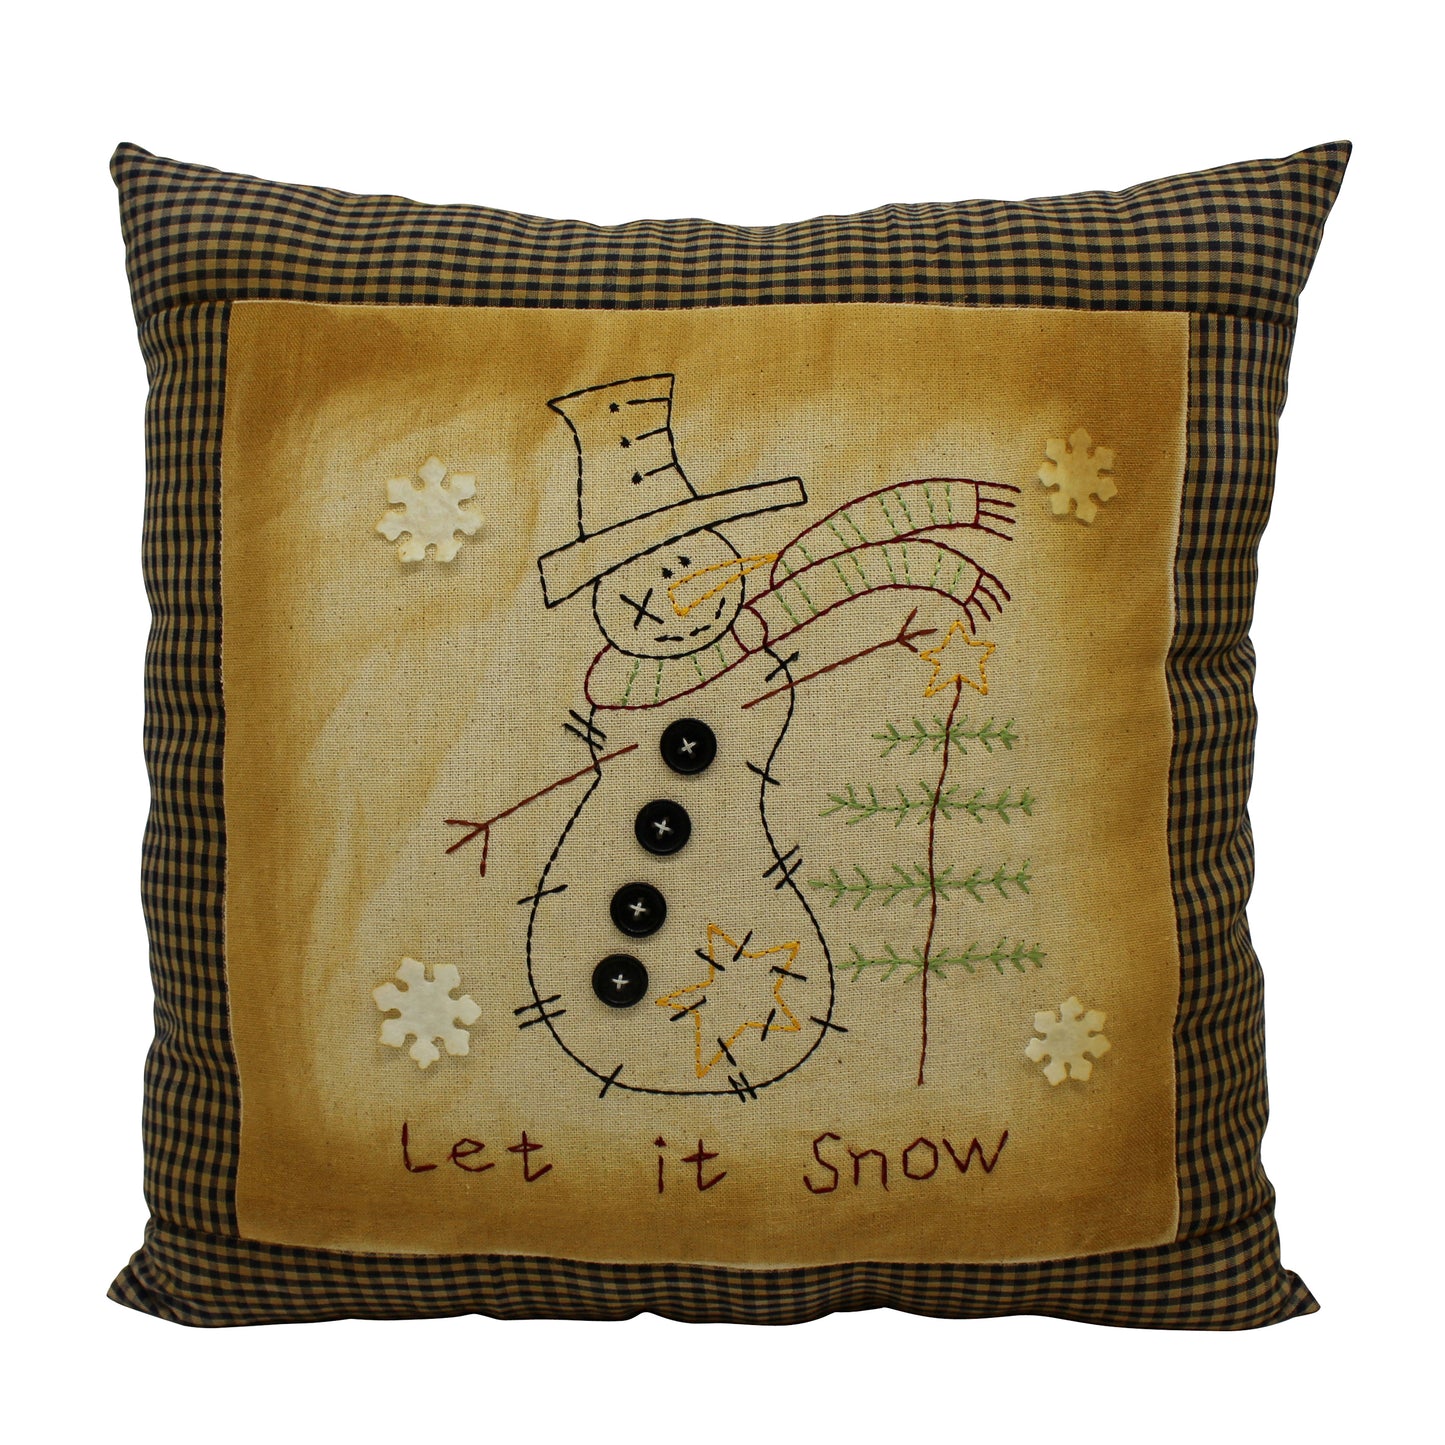 CVHOMEDECO. Primitives Let It Snow Embroidered Throw Pillow with Snowman Snowflake Tree Farmhouse Accent. 16 x 16 Inch